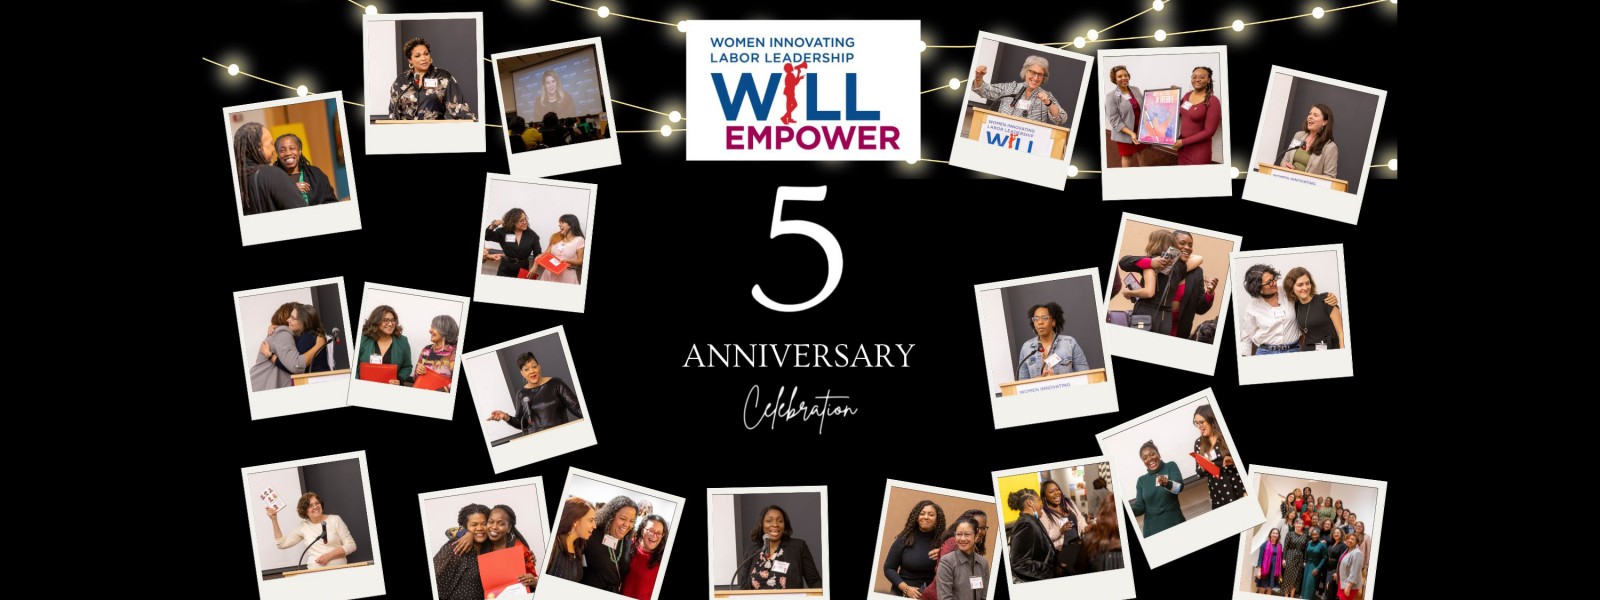 Image of WILL Empower 5 Year Celebration